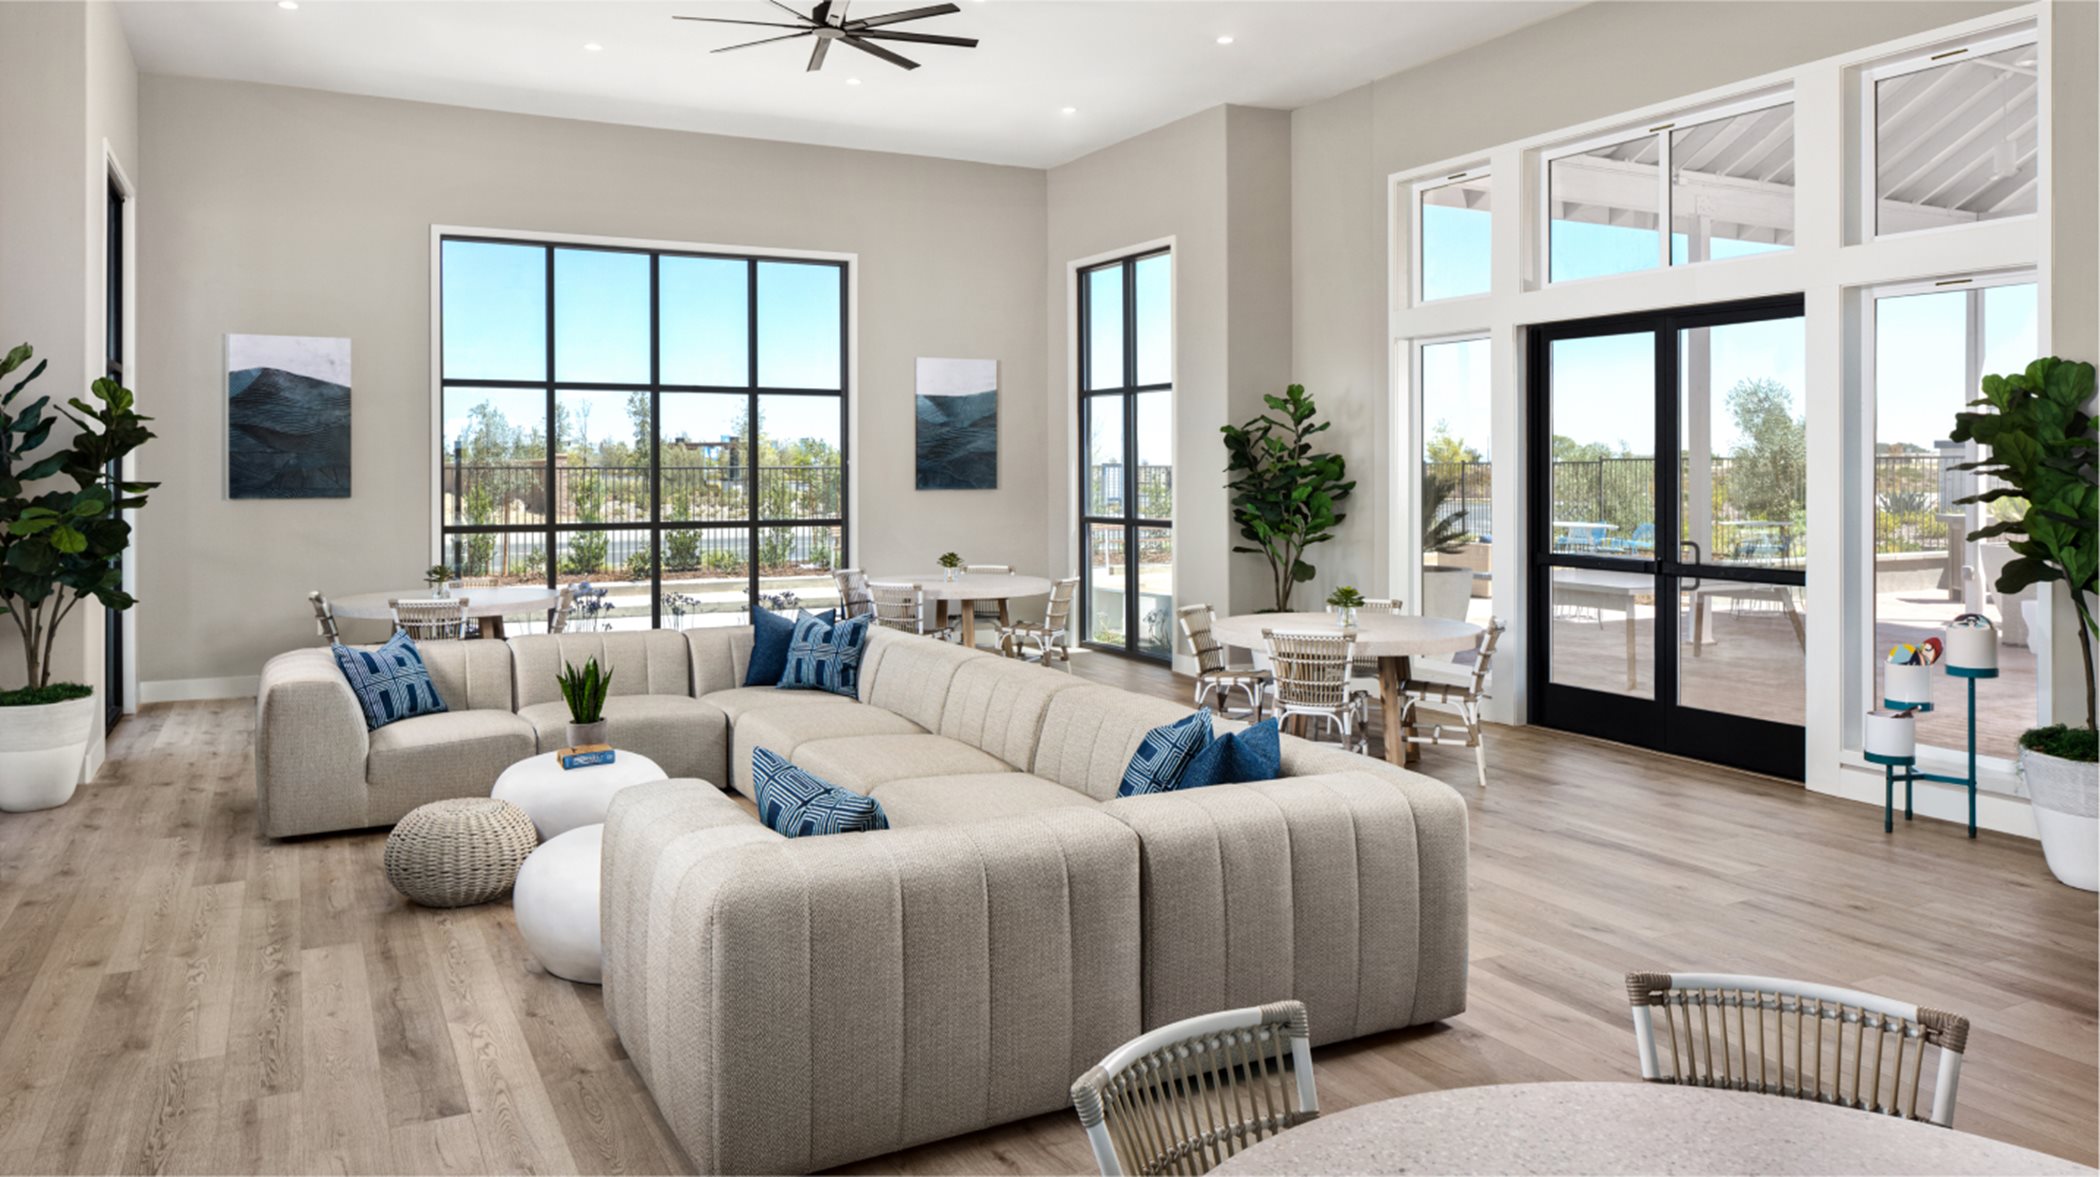 Northlake Amenity Clubhouse Interior Living